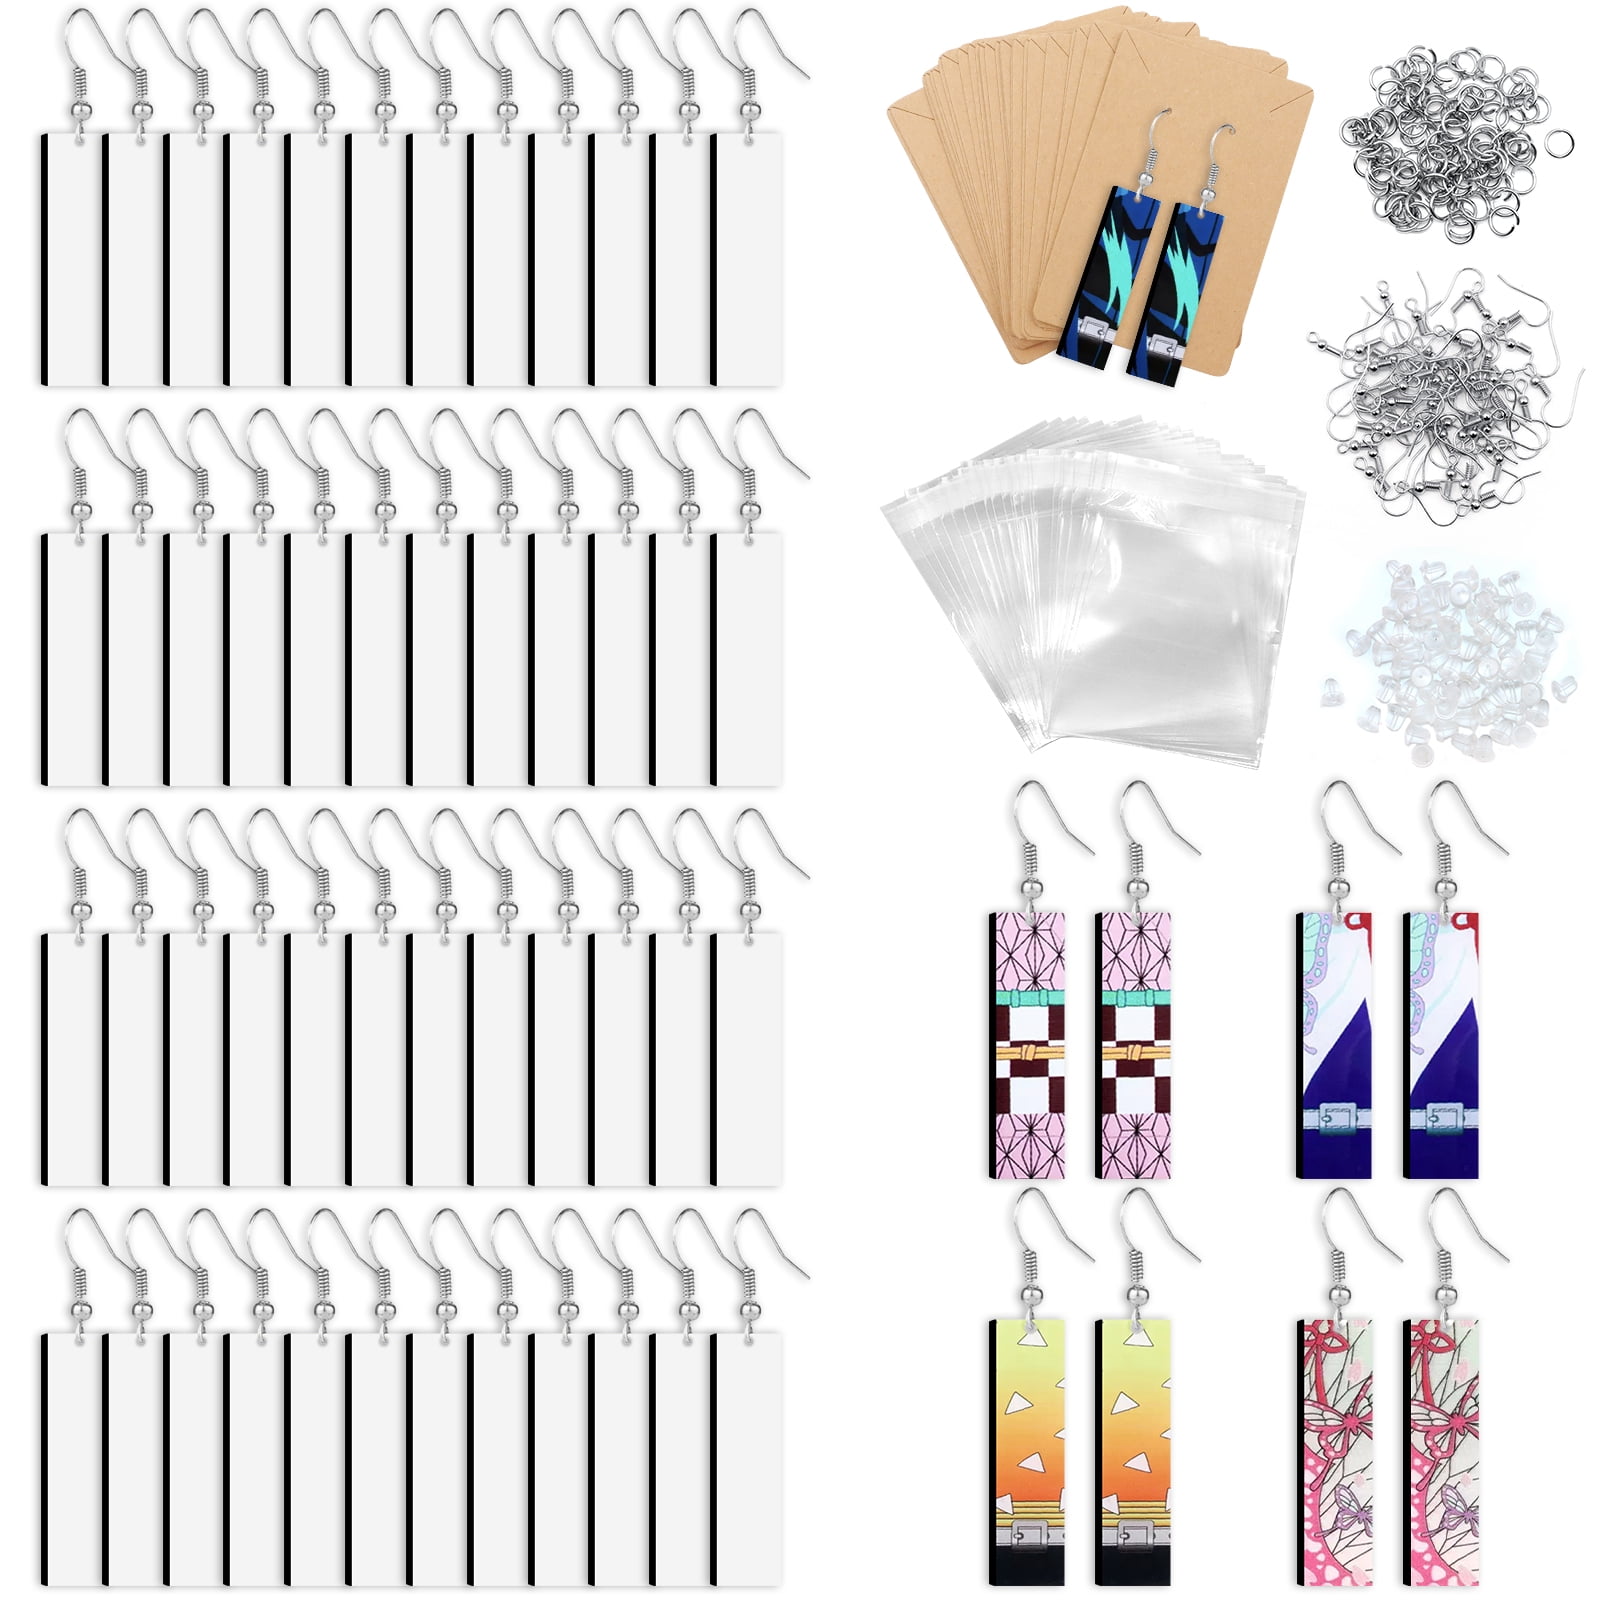 YGAOHF Sublimation Blanks Products, Sublimation Earring Blanks, Earring Making Kit Include Earring Hooks, Jump Rings for Halloween Christmas Women Girls DIY